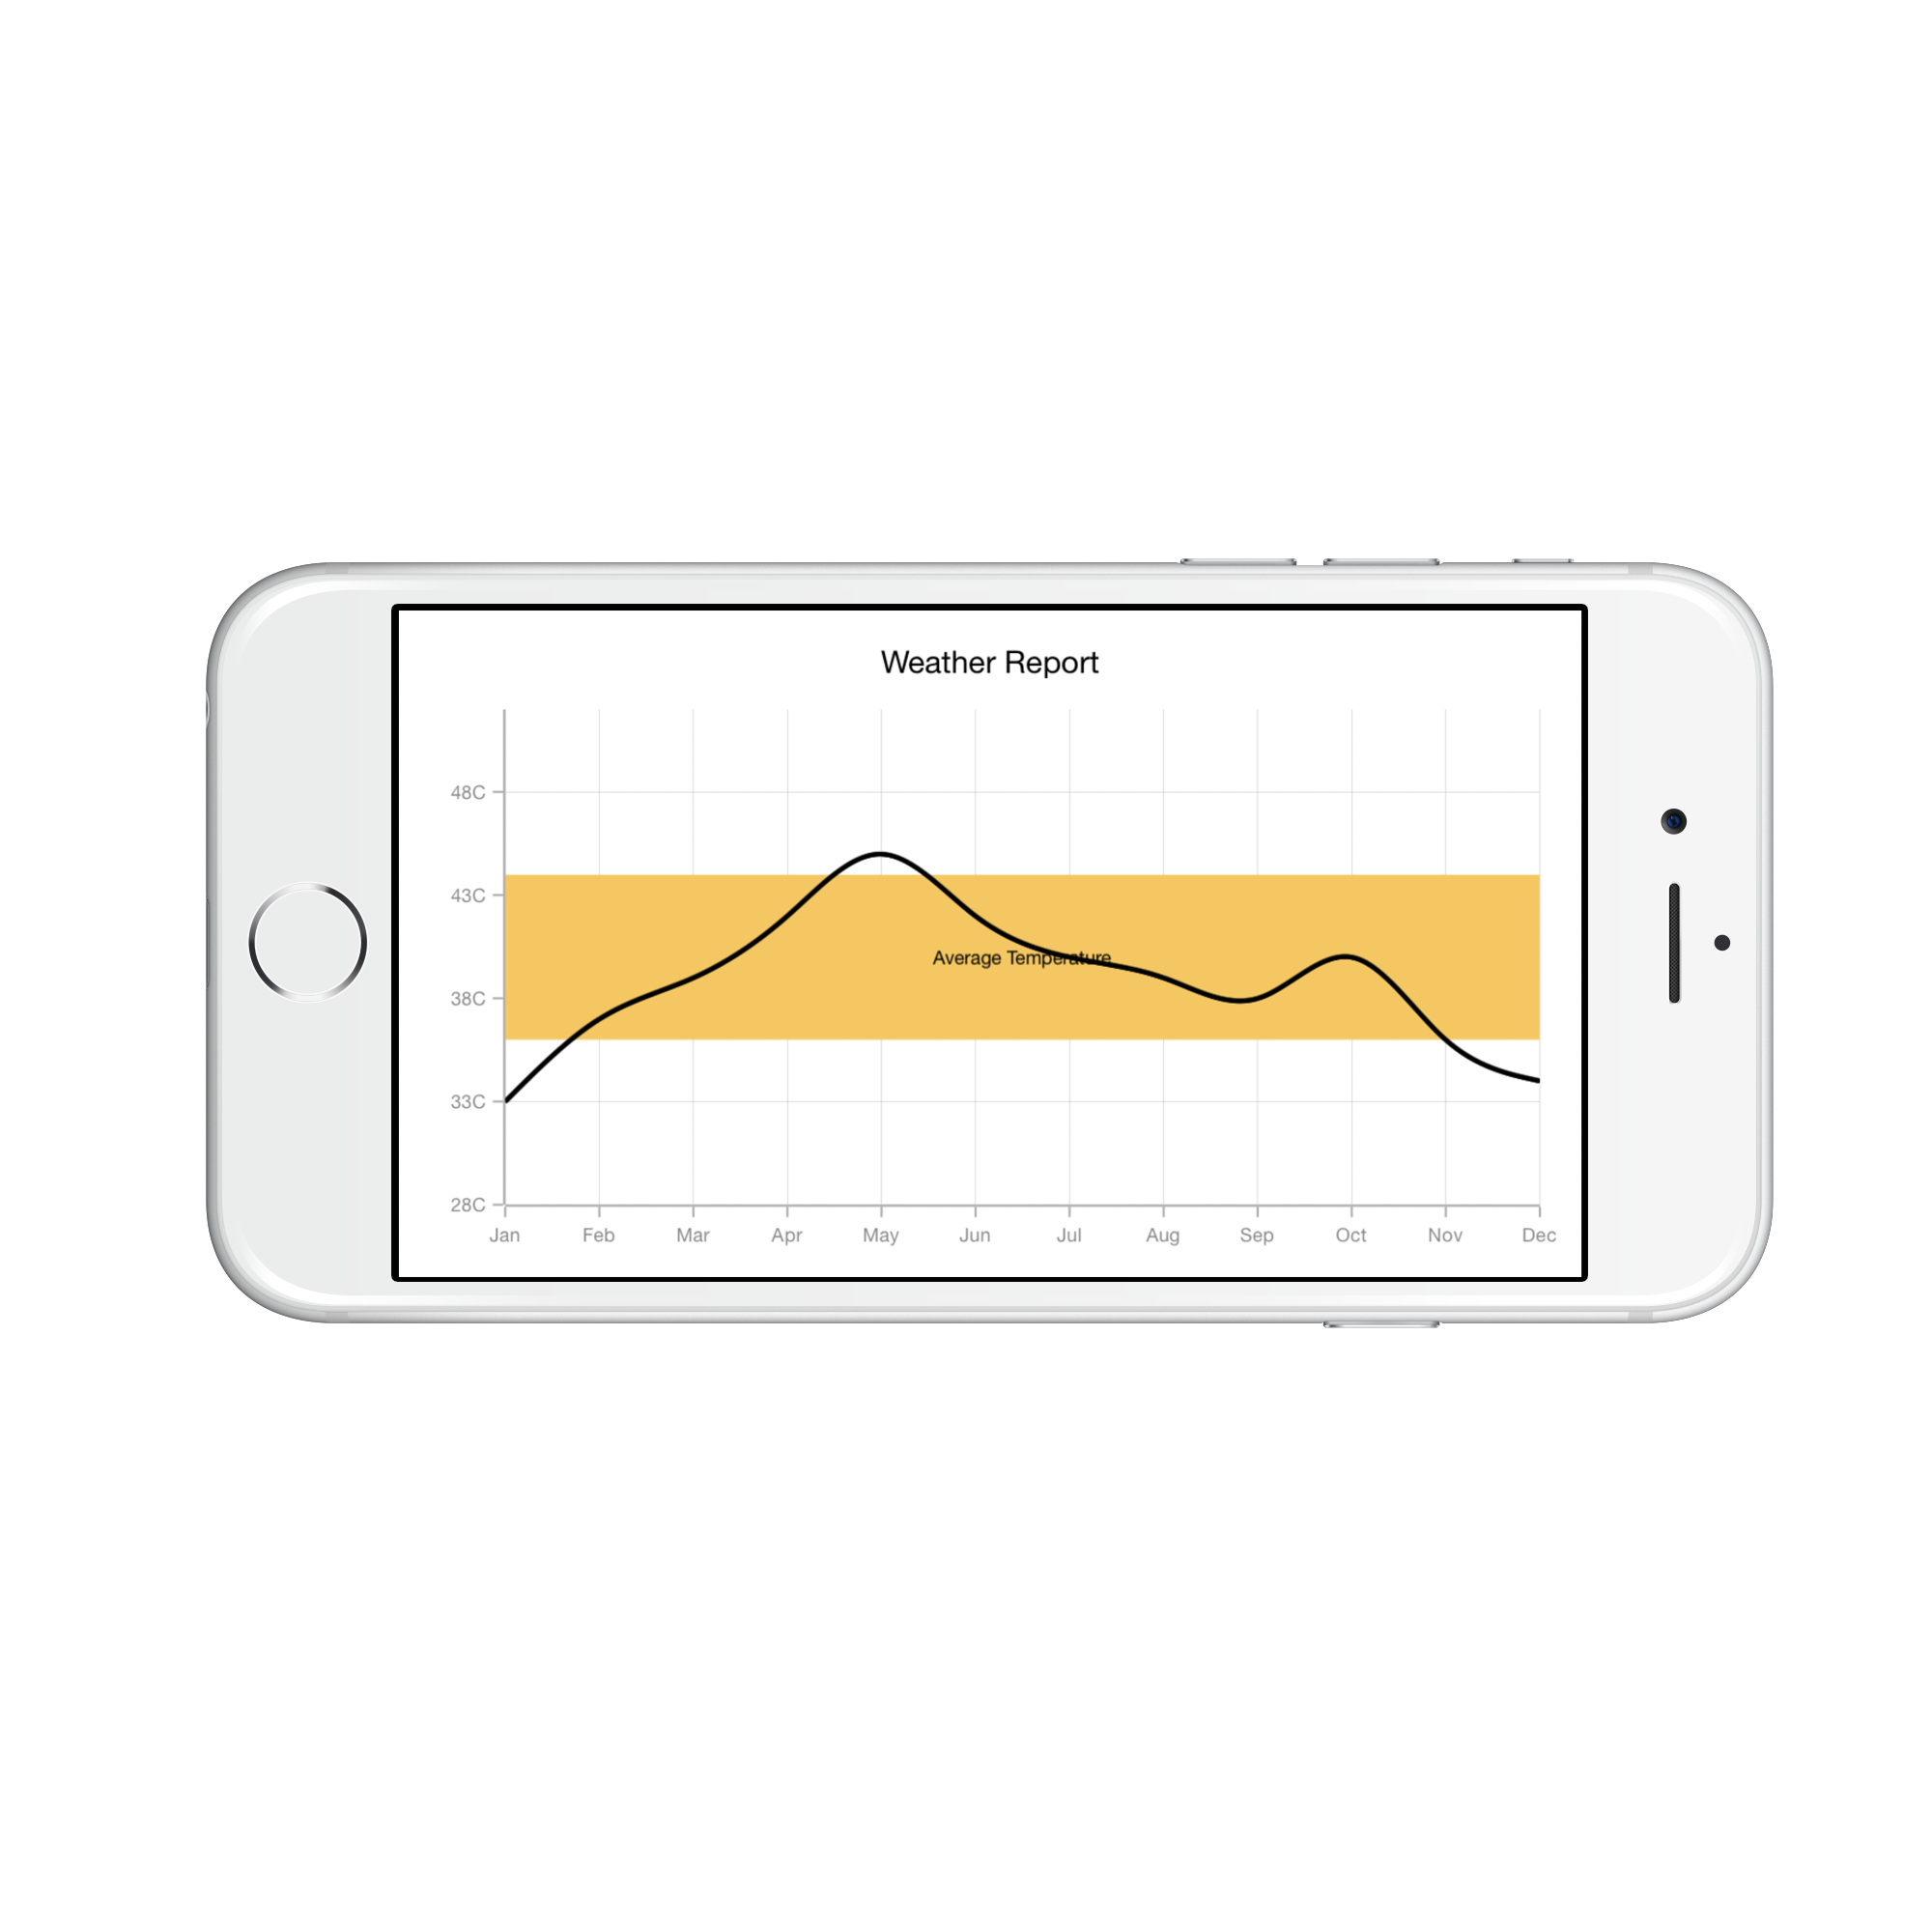 Numerical strip lines support in Xamarin.iOS Chart